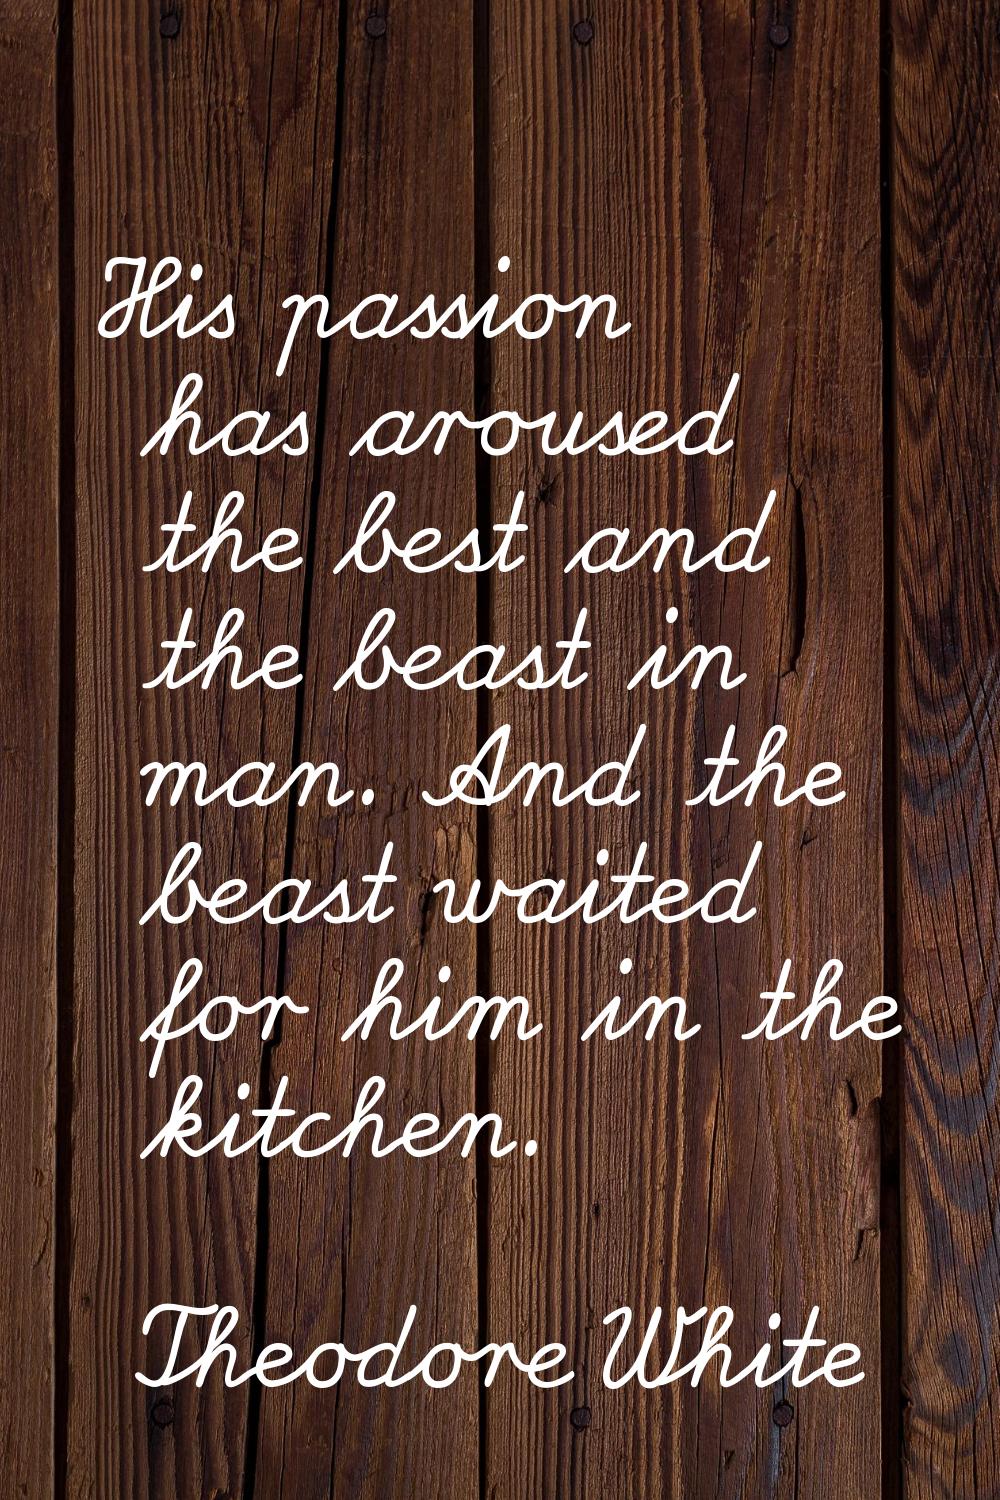 His passion has aroused the best and the beast in man. And the beast waited for him in the kitchen.